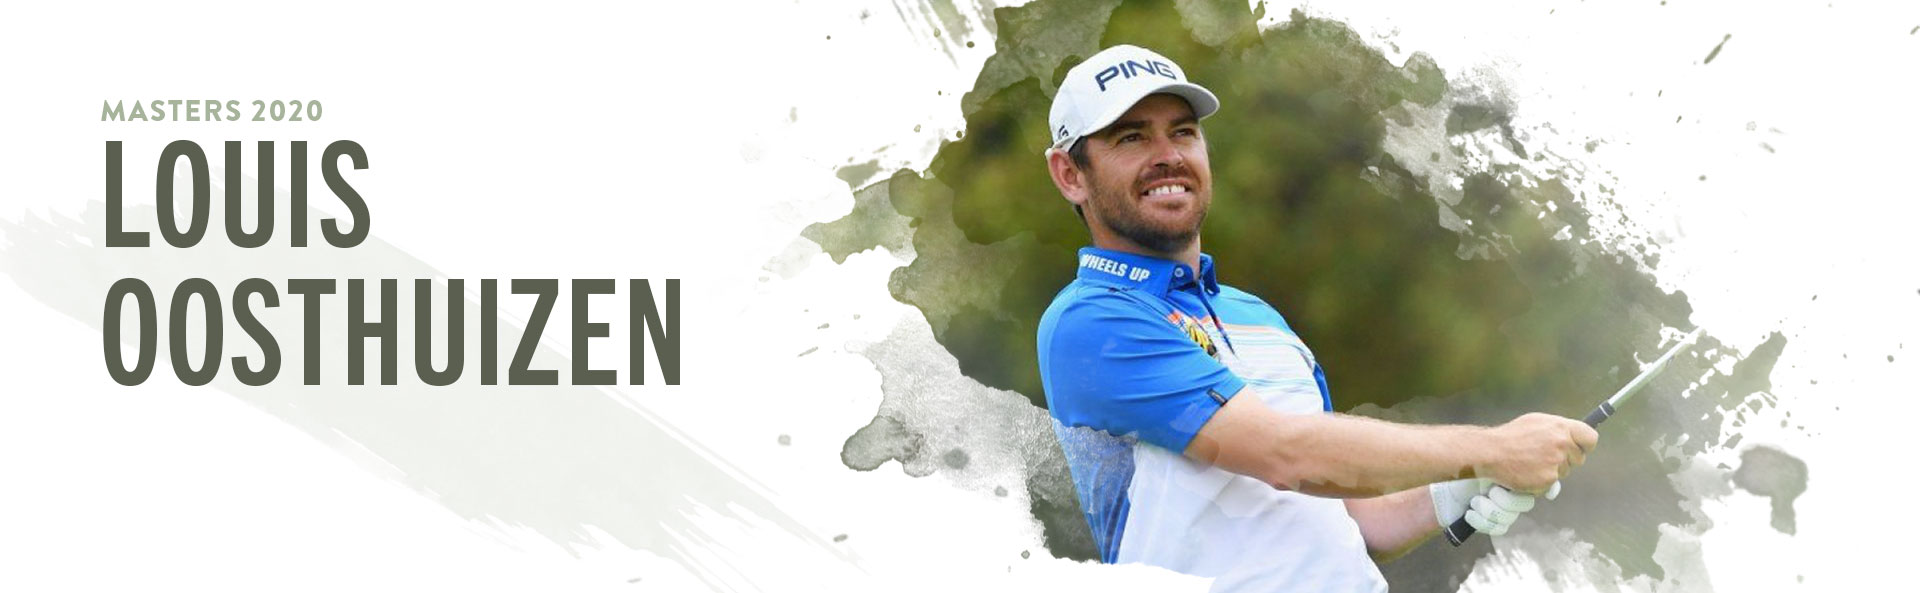 2020-masters-louis-oosthuizen